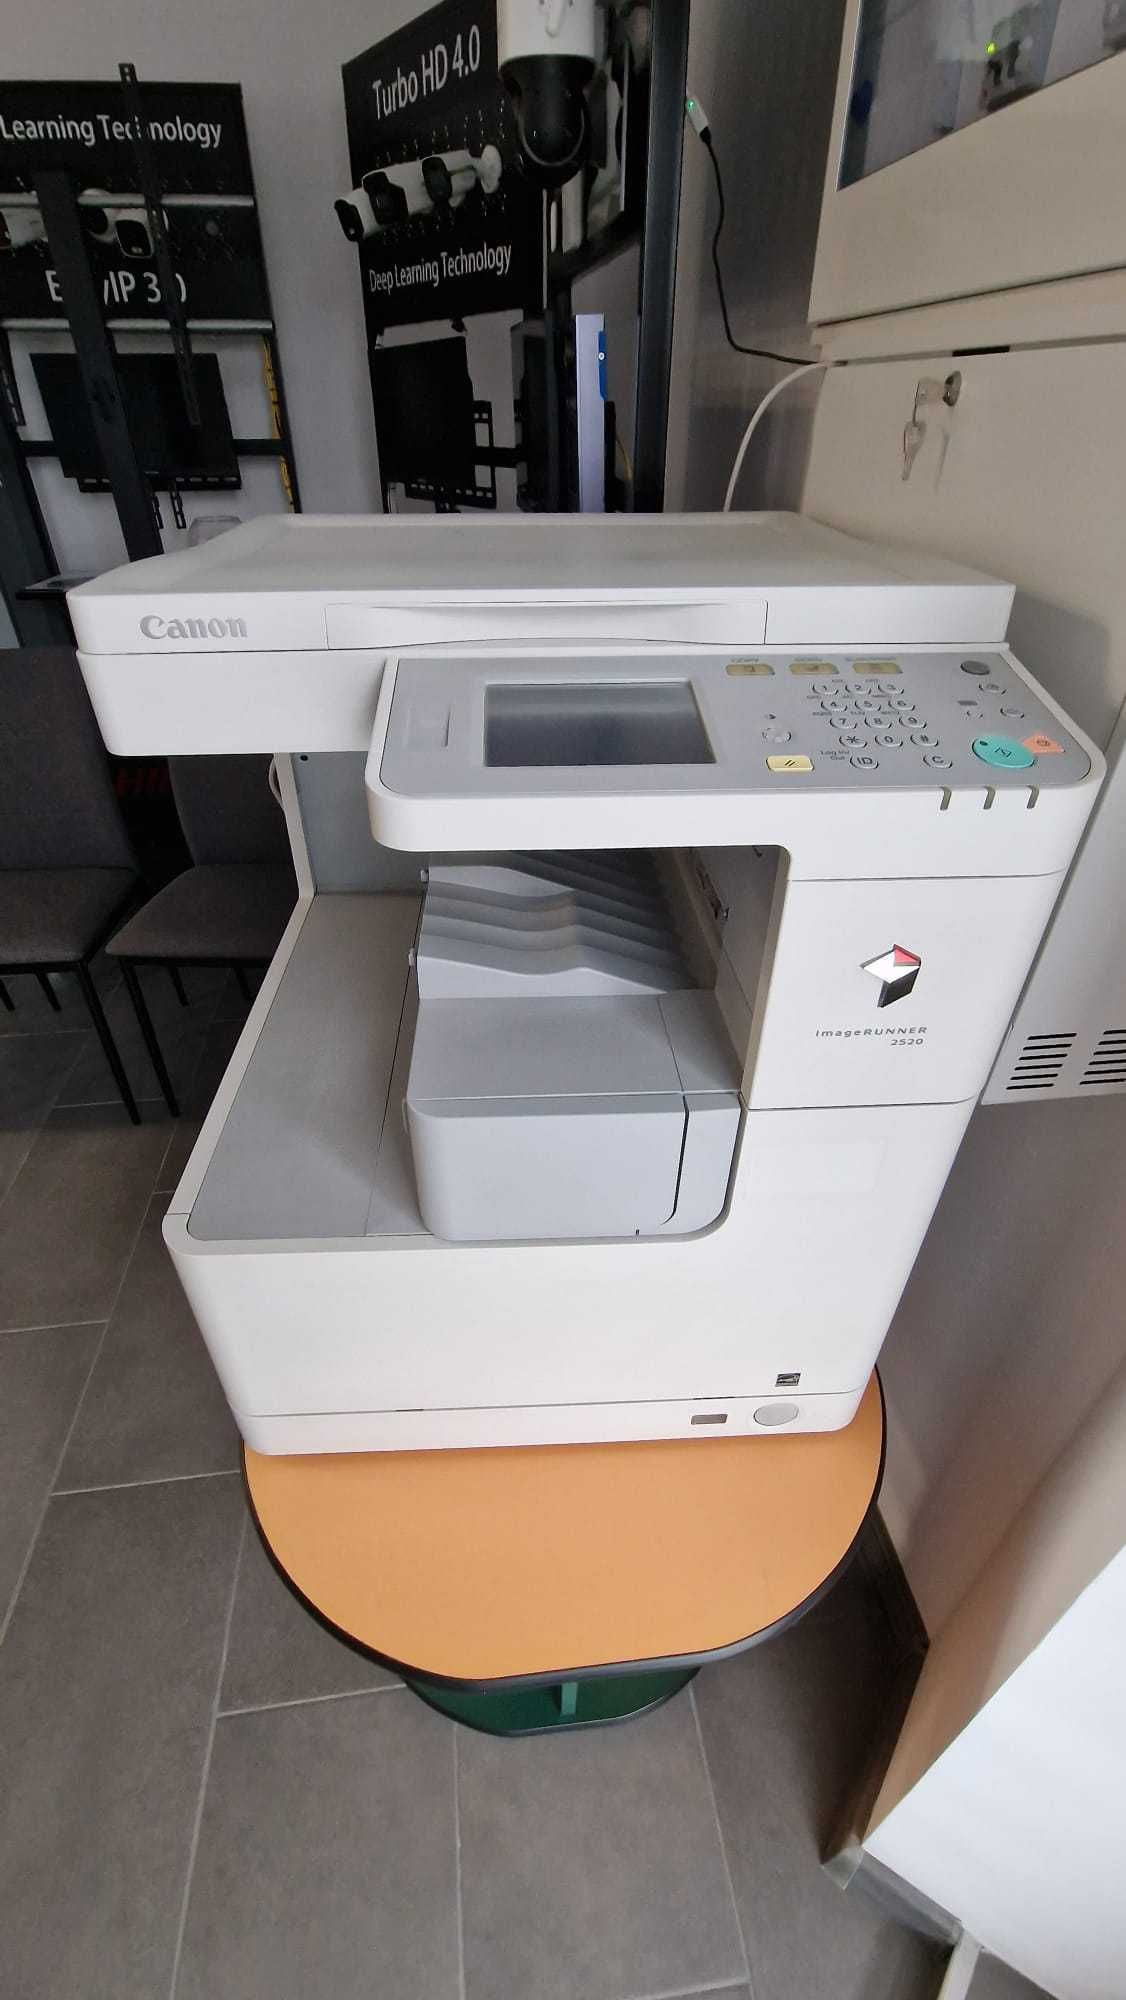 Multifunctional Canon imageRUNNER 2520, A3